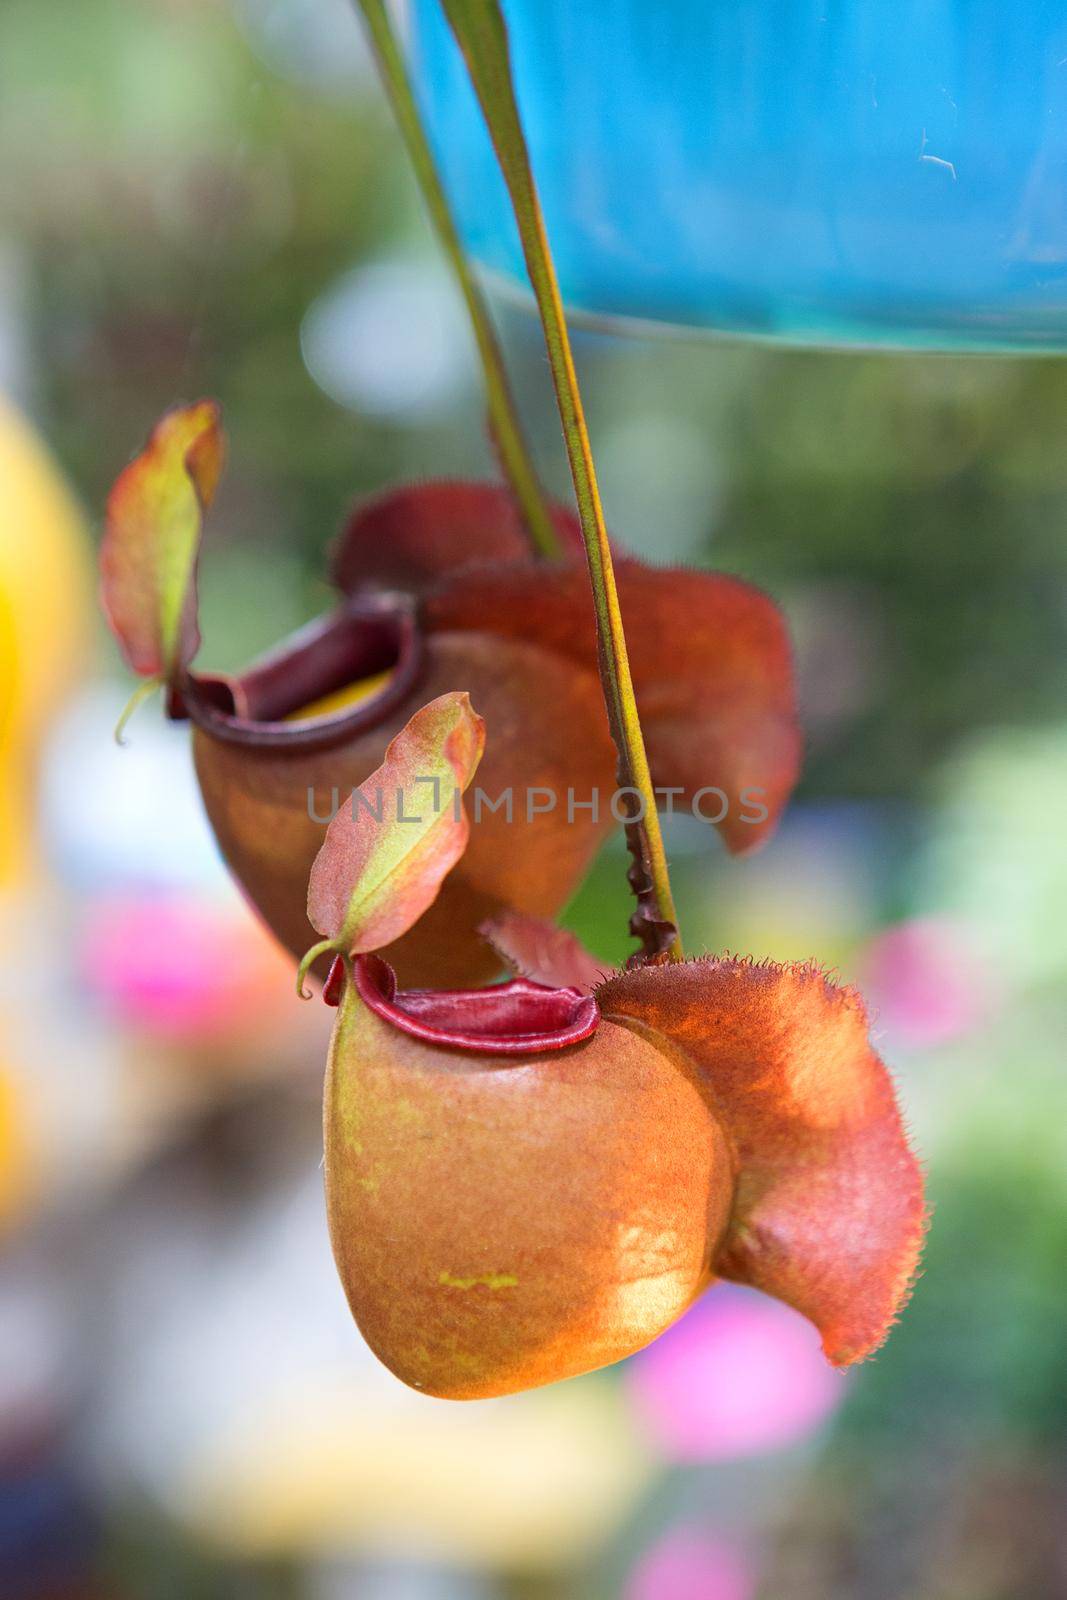 nepenthes ampullaria or Pitcher plant